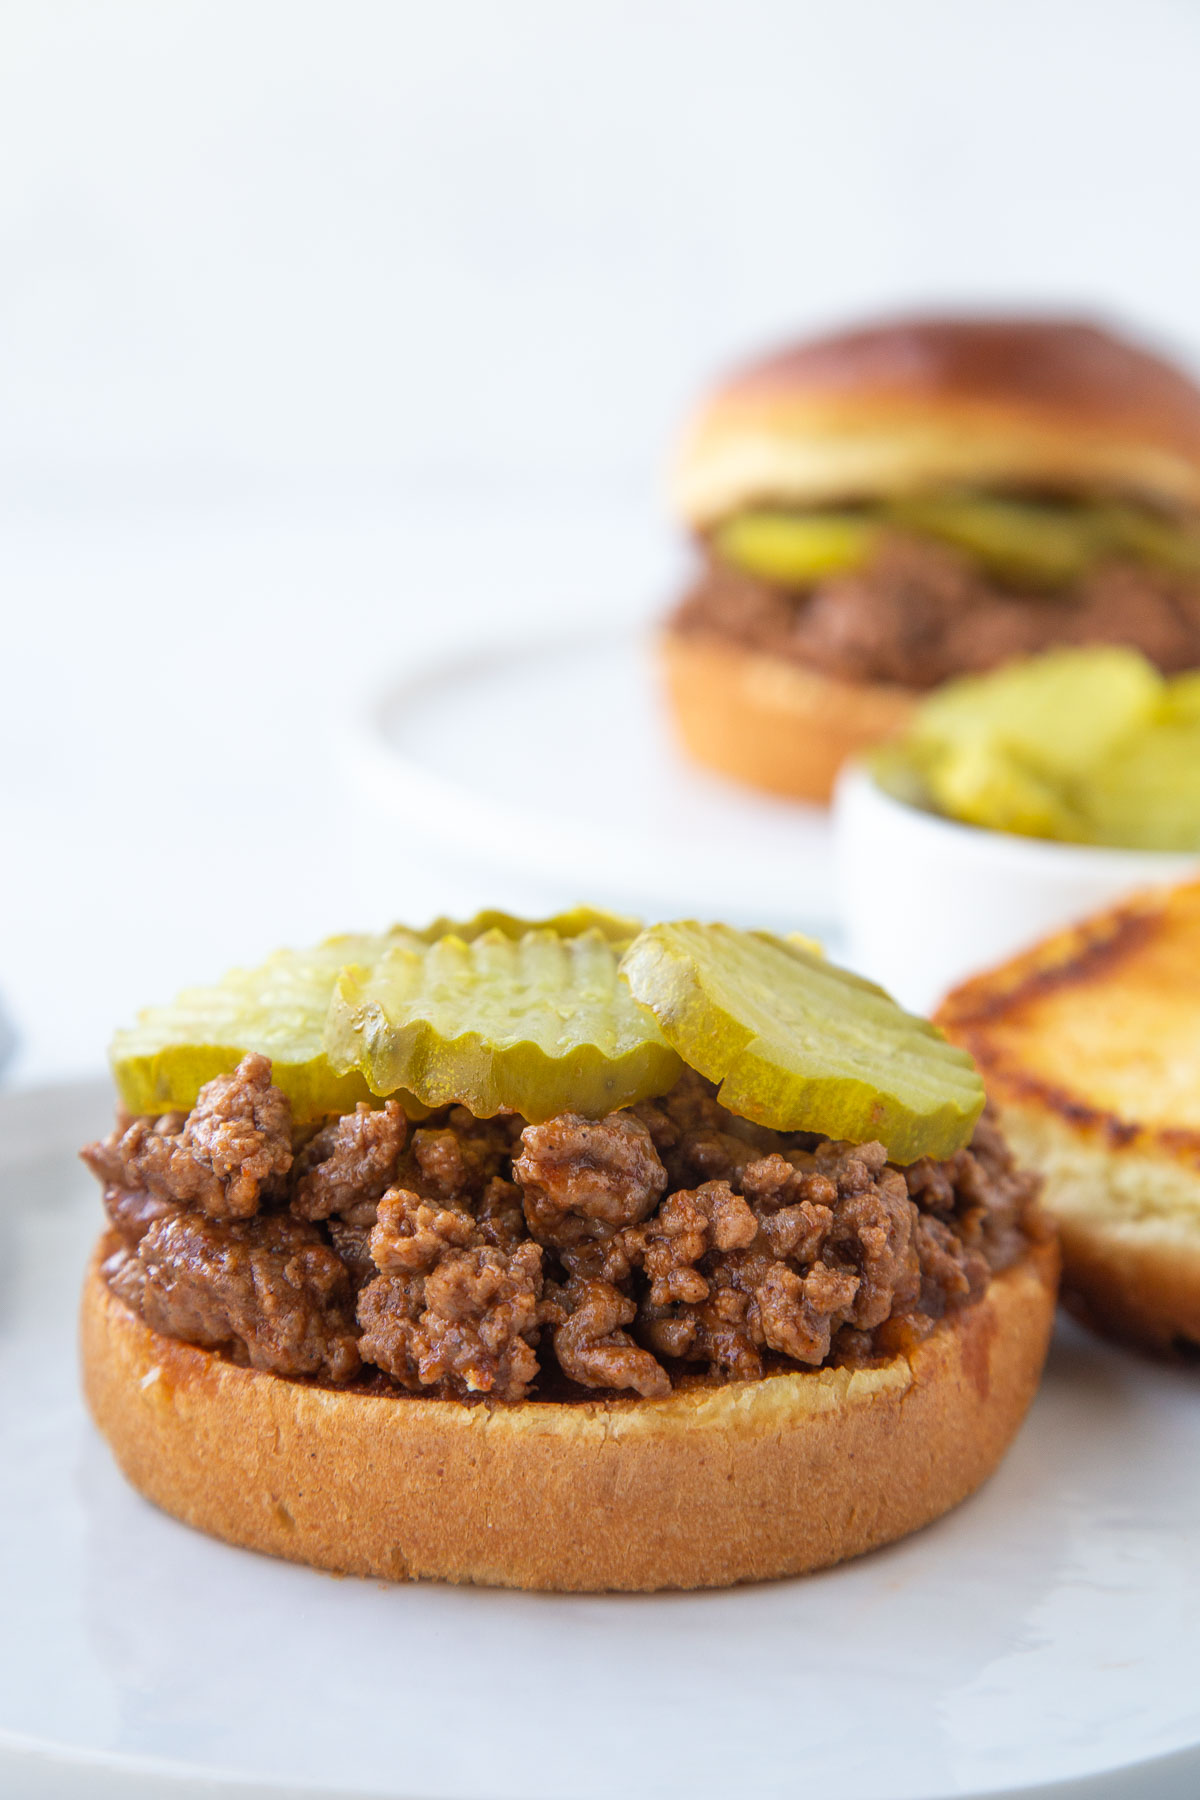 open faced sloppy joe topped with pickles on a bun.